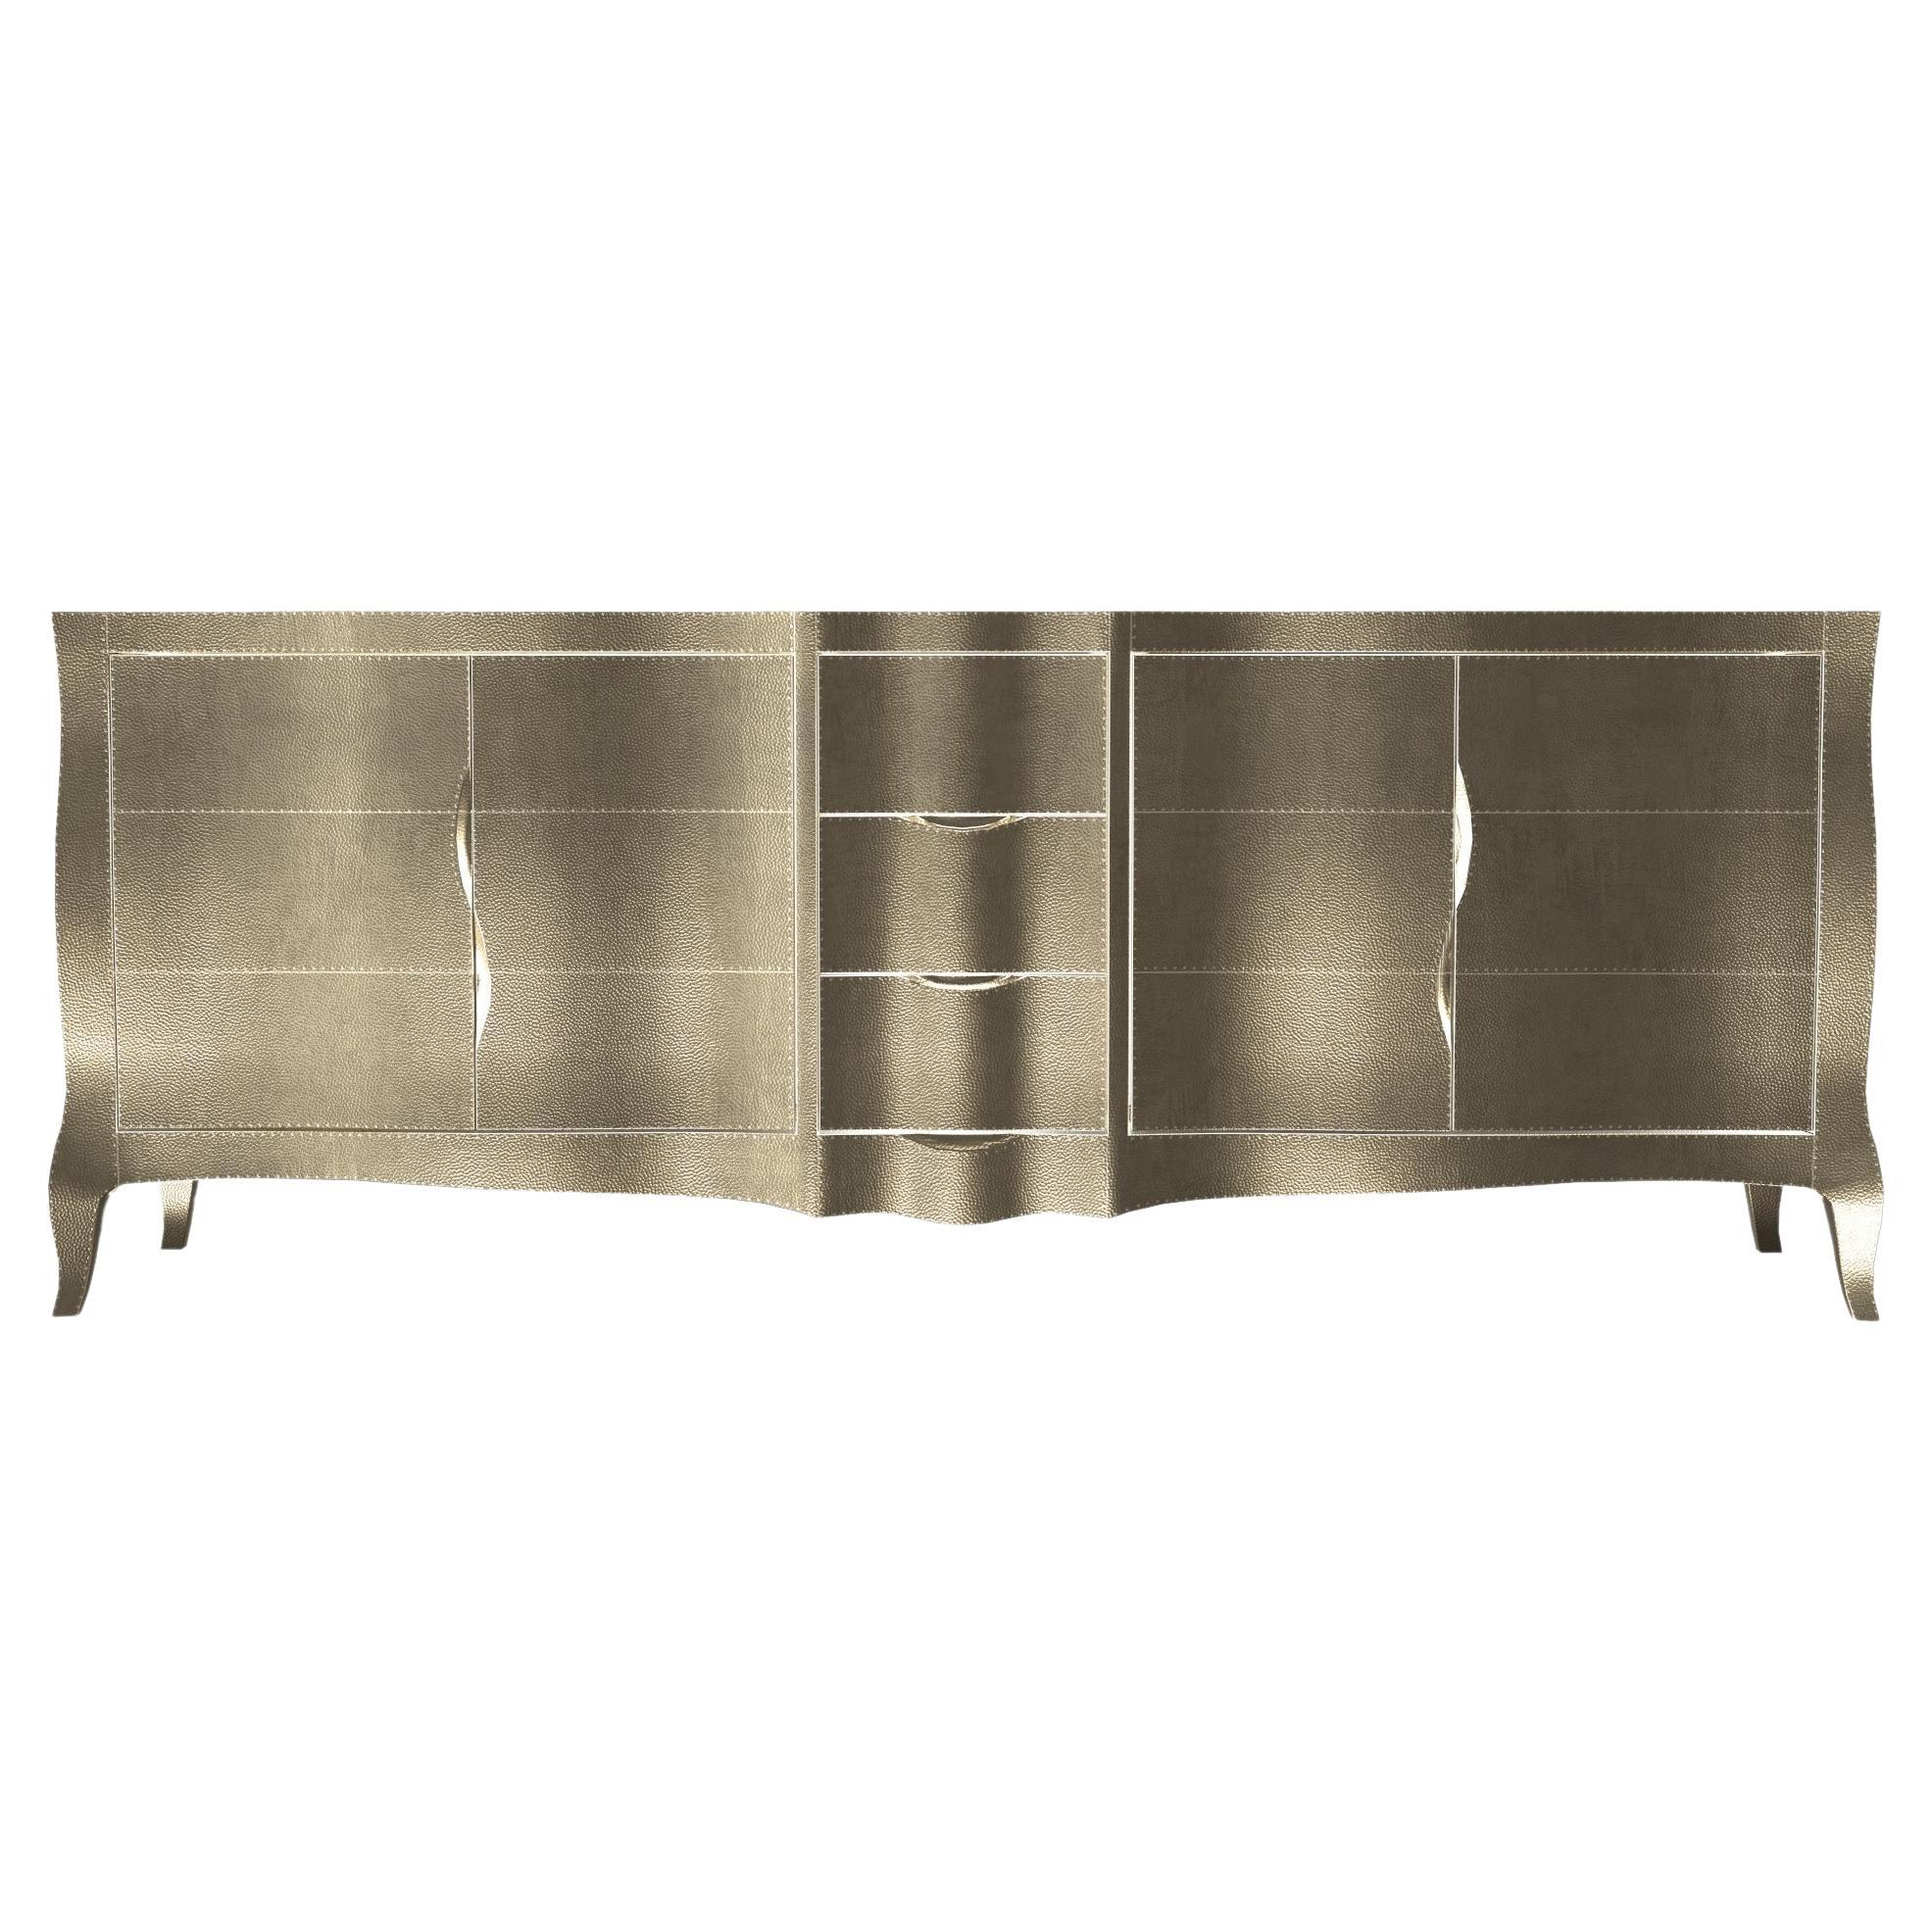 Stephanie Odegard Collection Sideboards